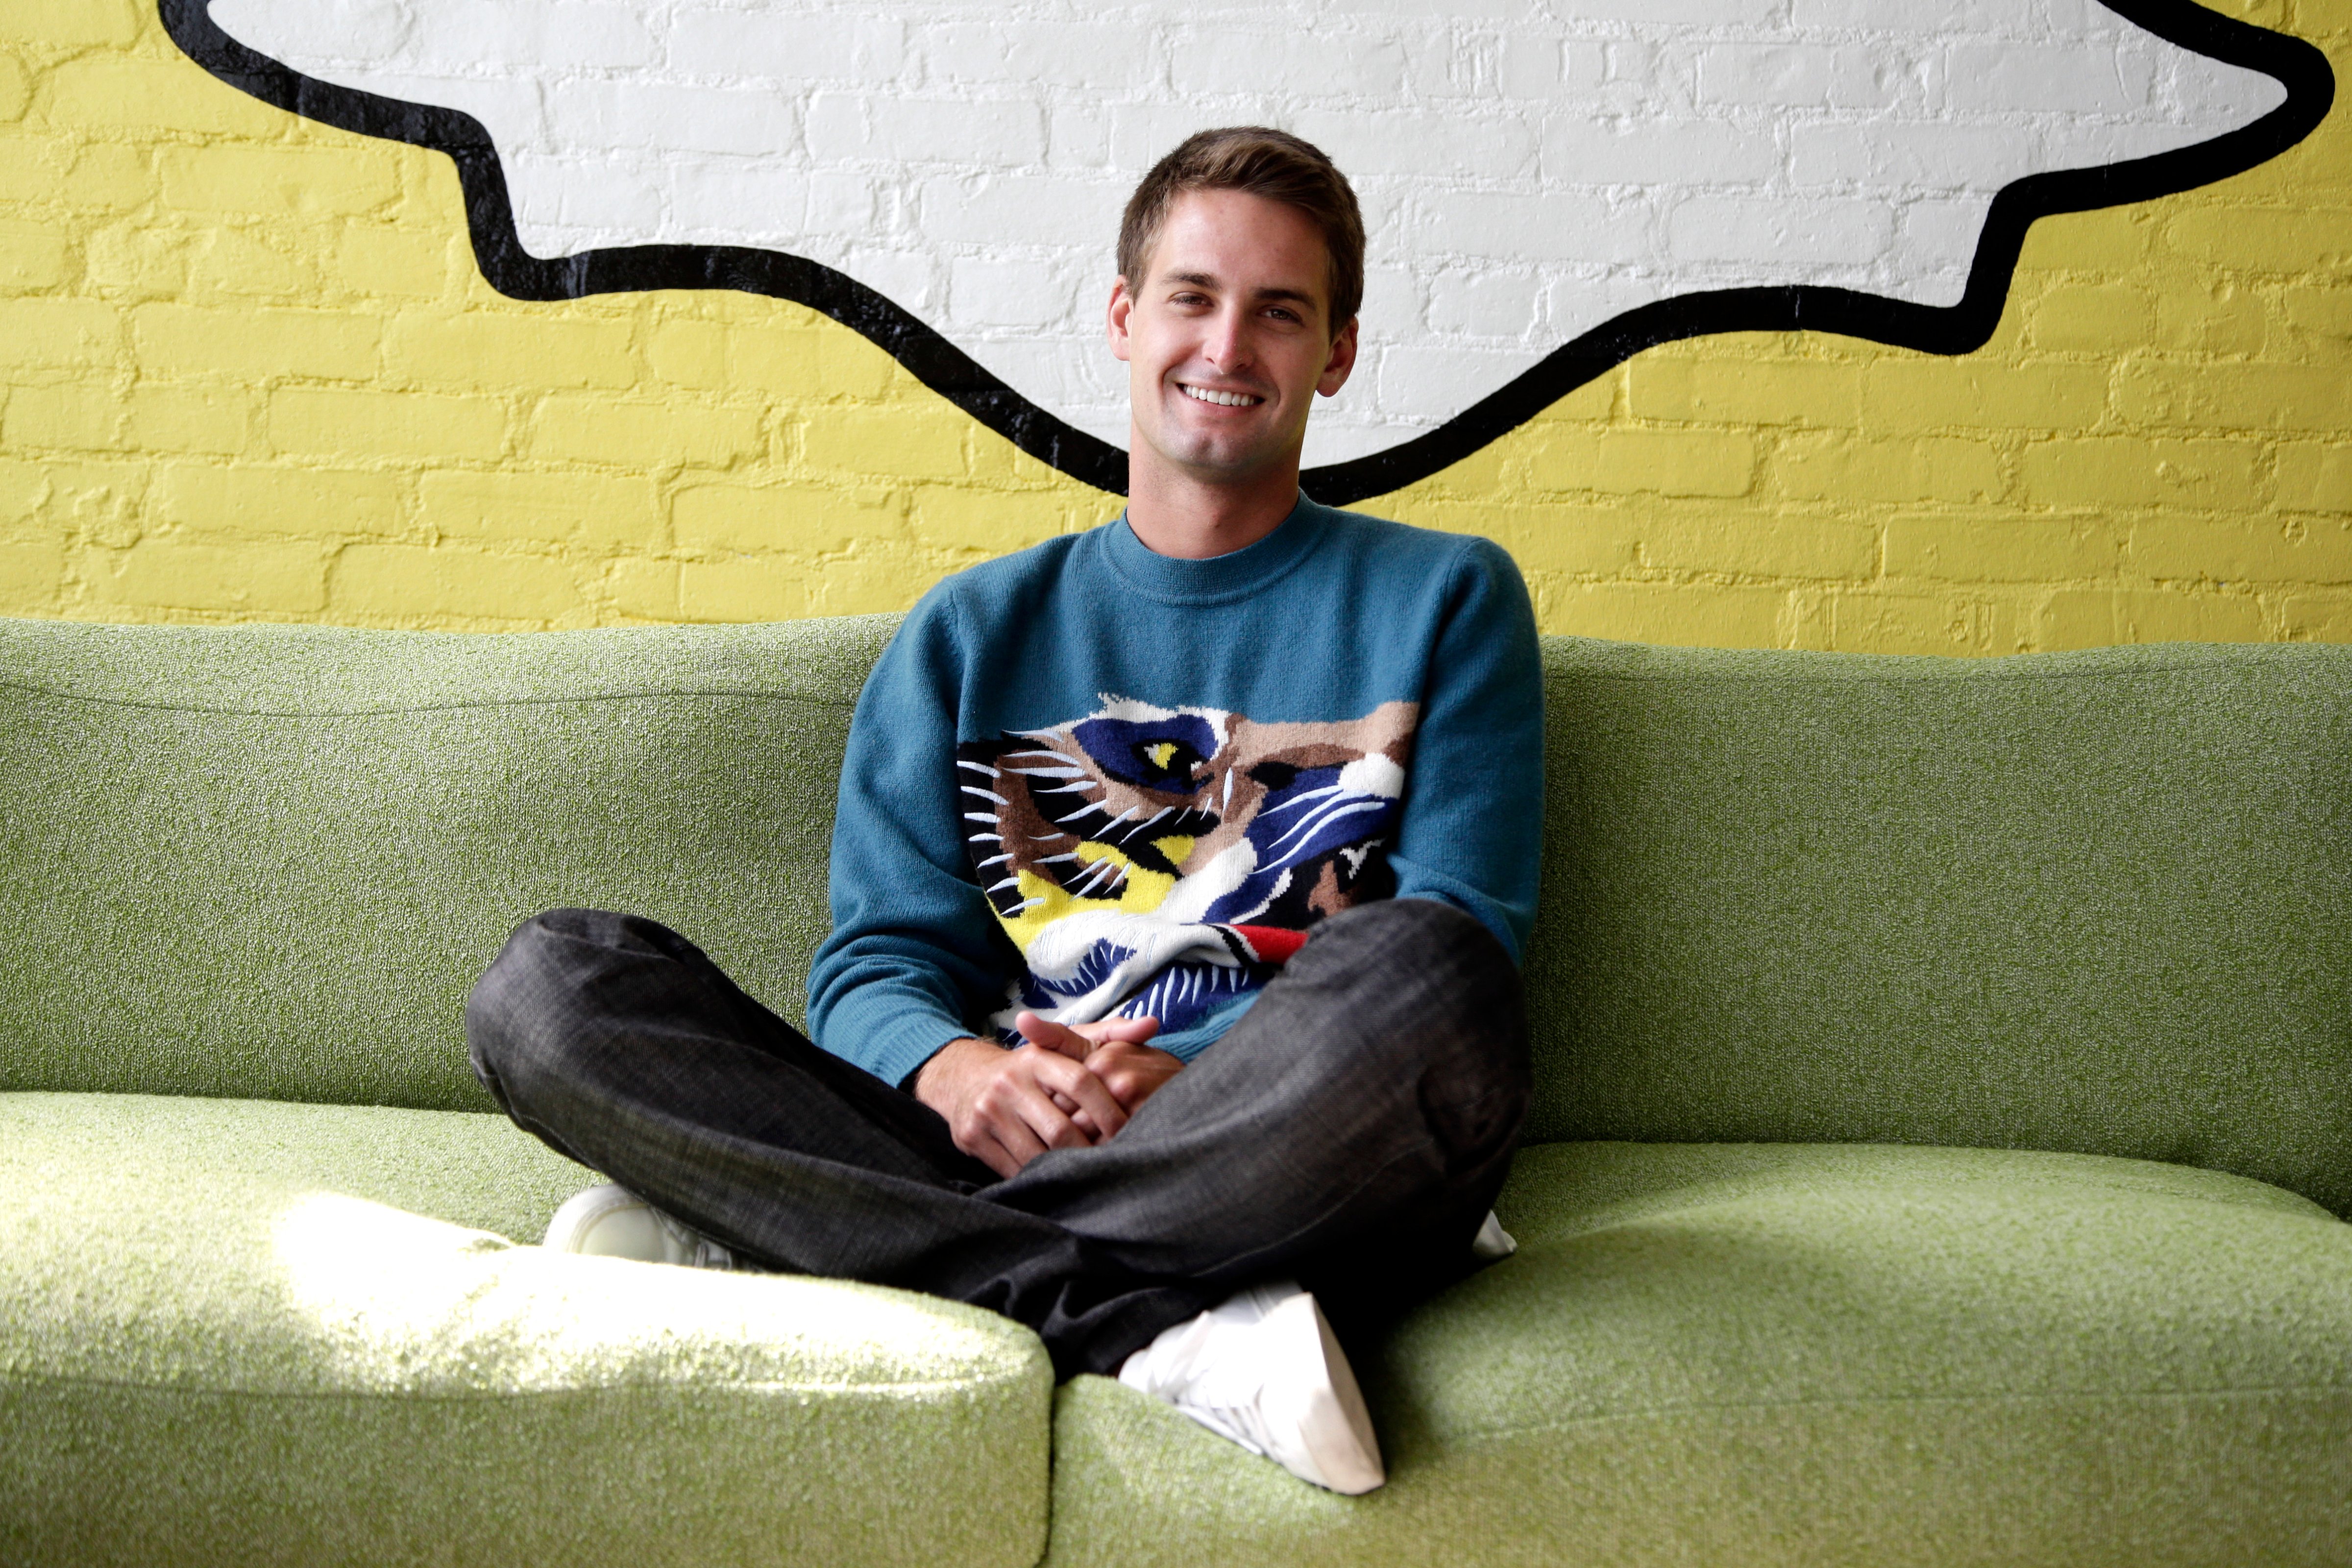 Snapchat CEO Evan Spiegel poses for photos, in Los Angeles on Oct. 24, 2013. (Jae C. Hong—AP)